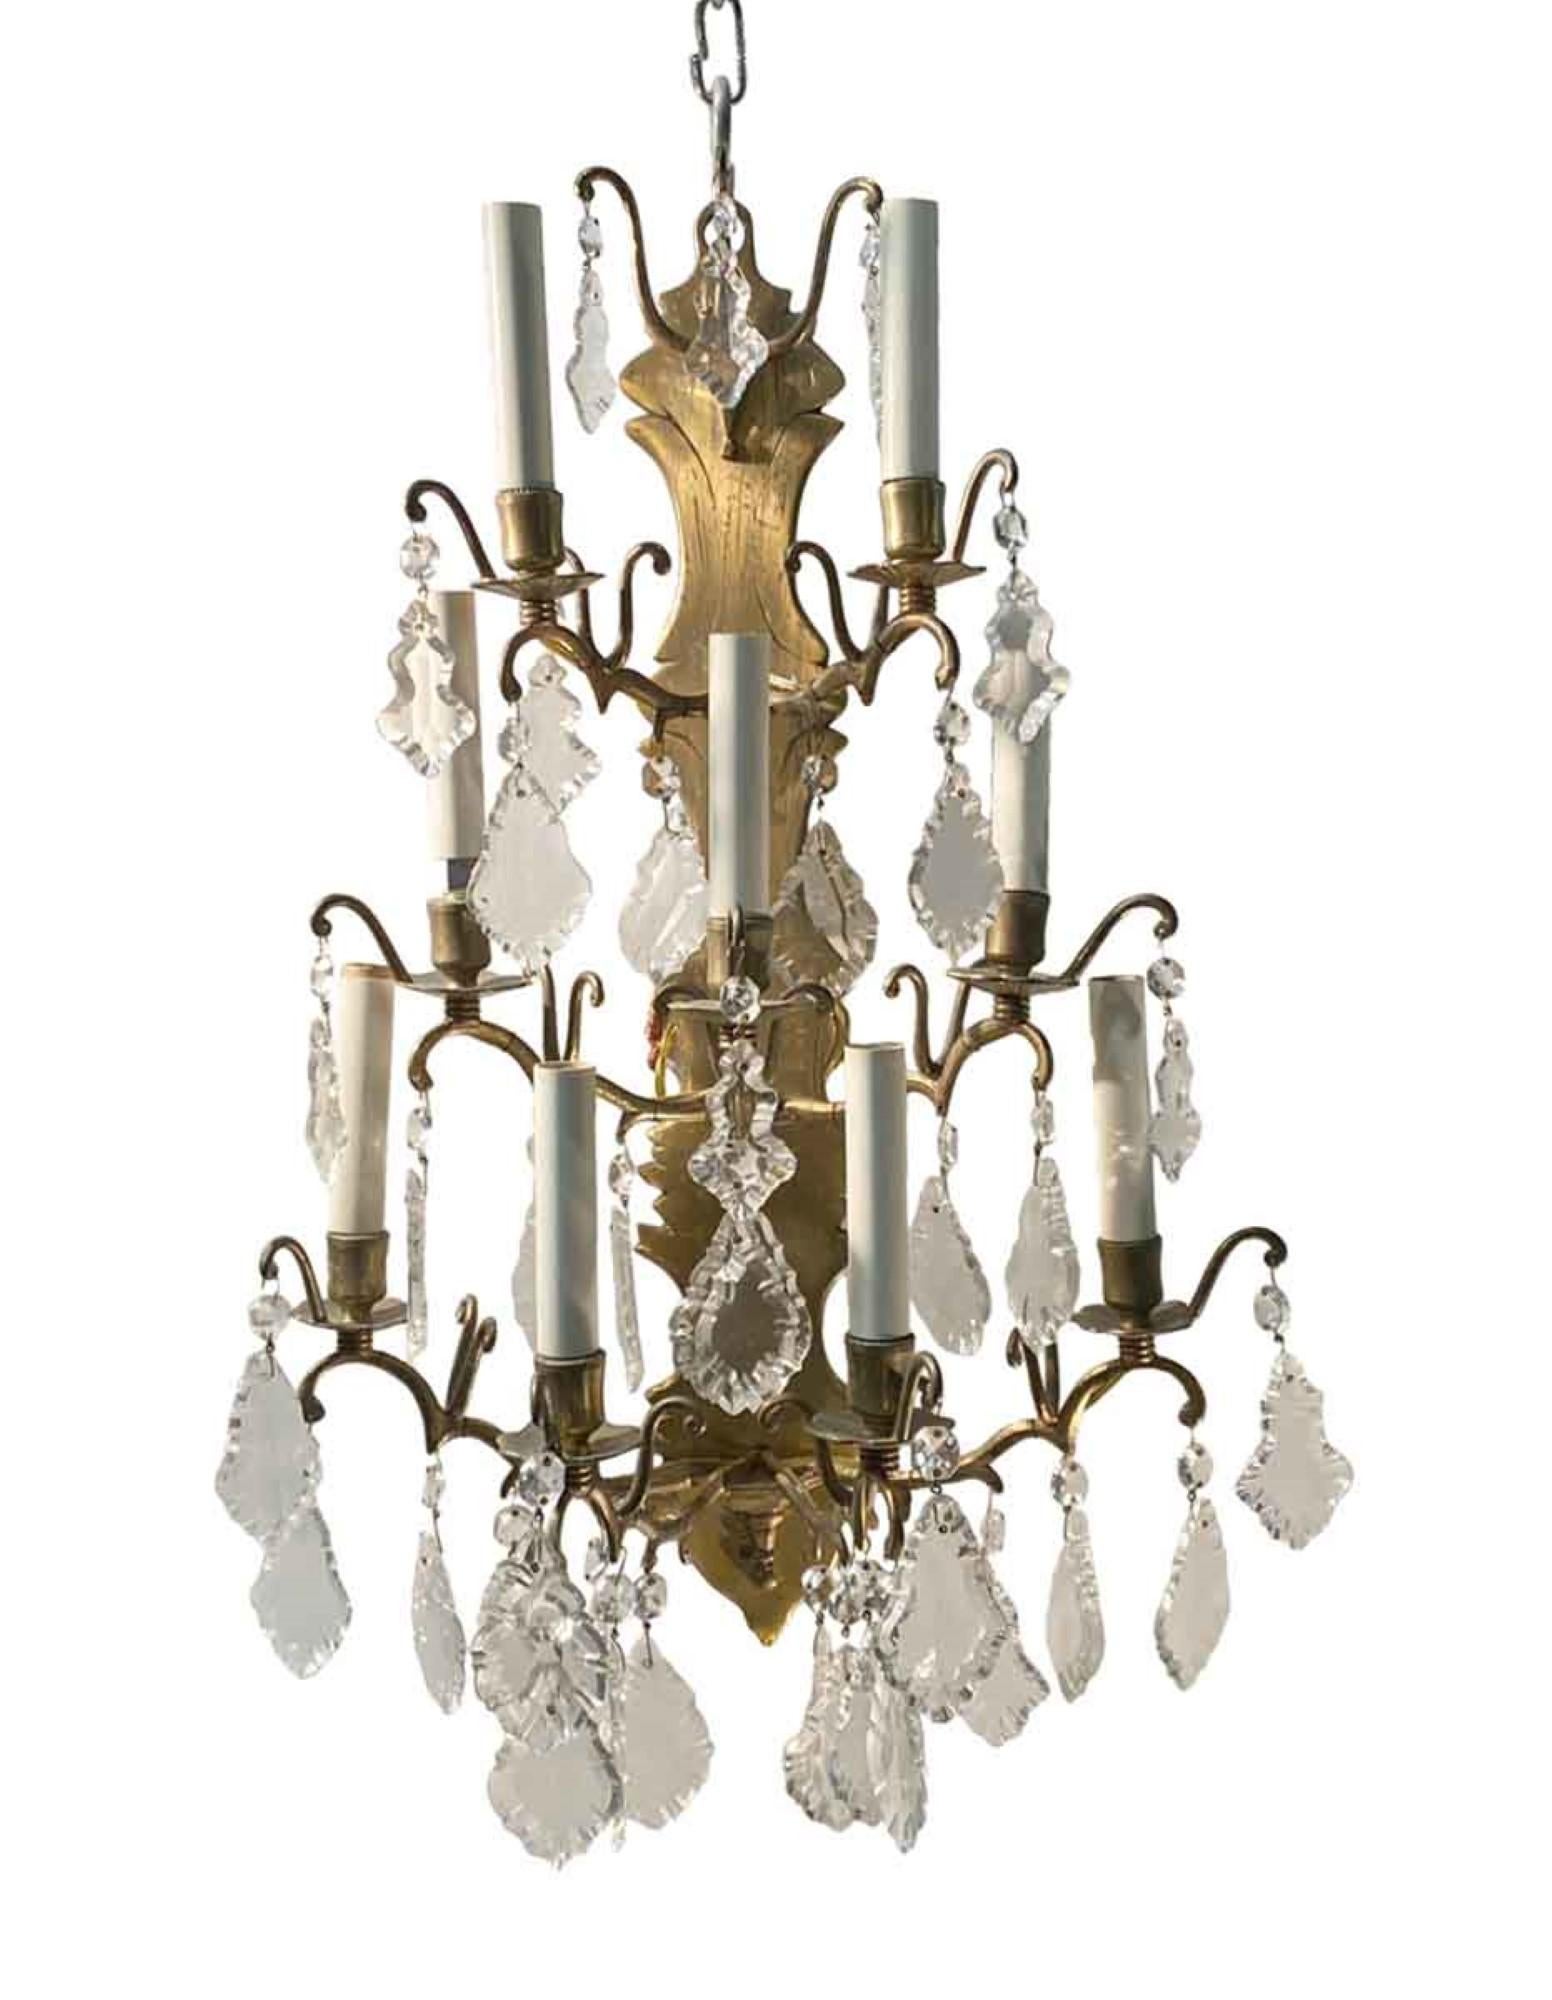 Original to the 1930s Plaza Hotel in New York City, this is a large 9-arm brass French sconce. Cleaned and rewired. Small quantity available at time of posting. Priced each. Please inquire. Please note, this item is located in our Scranton, PA